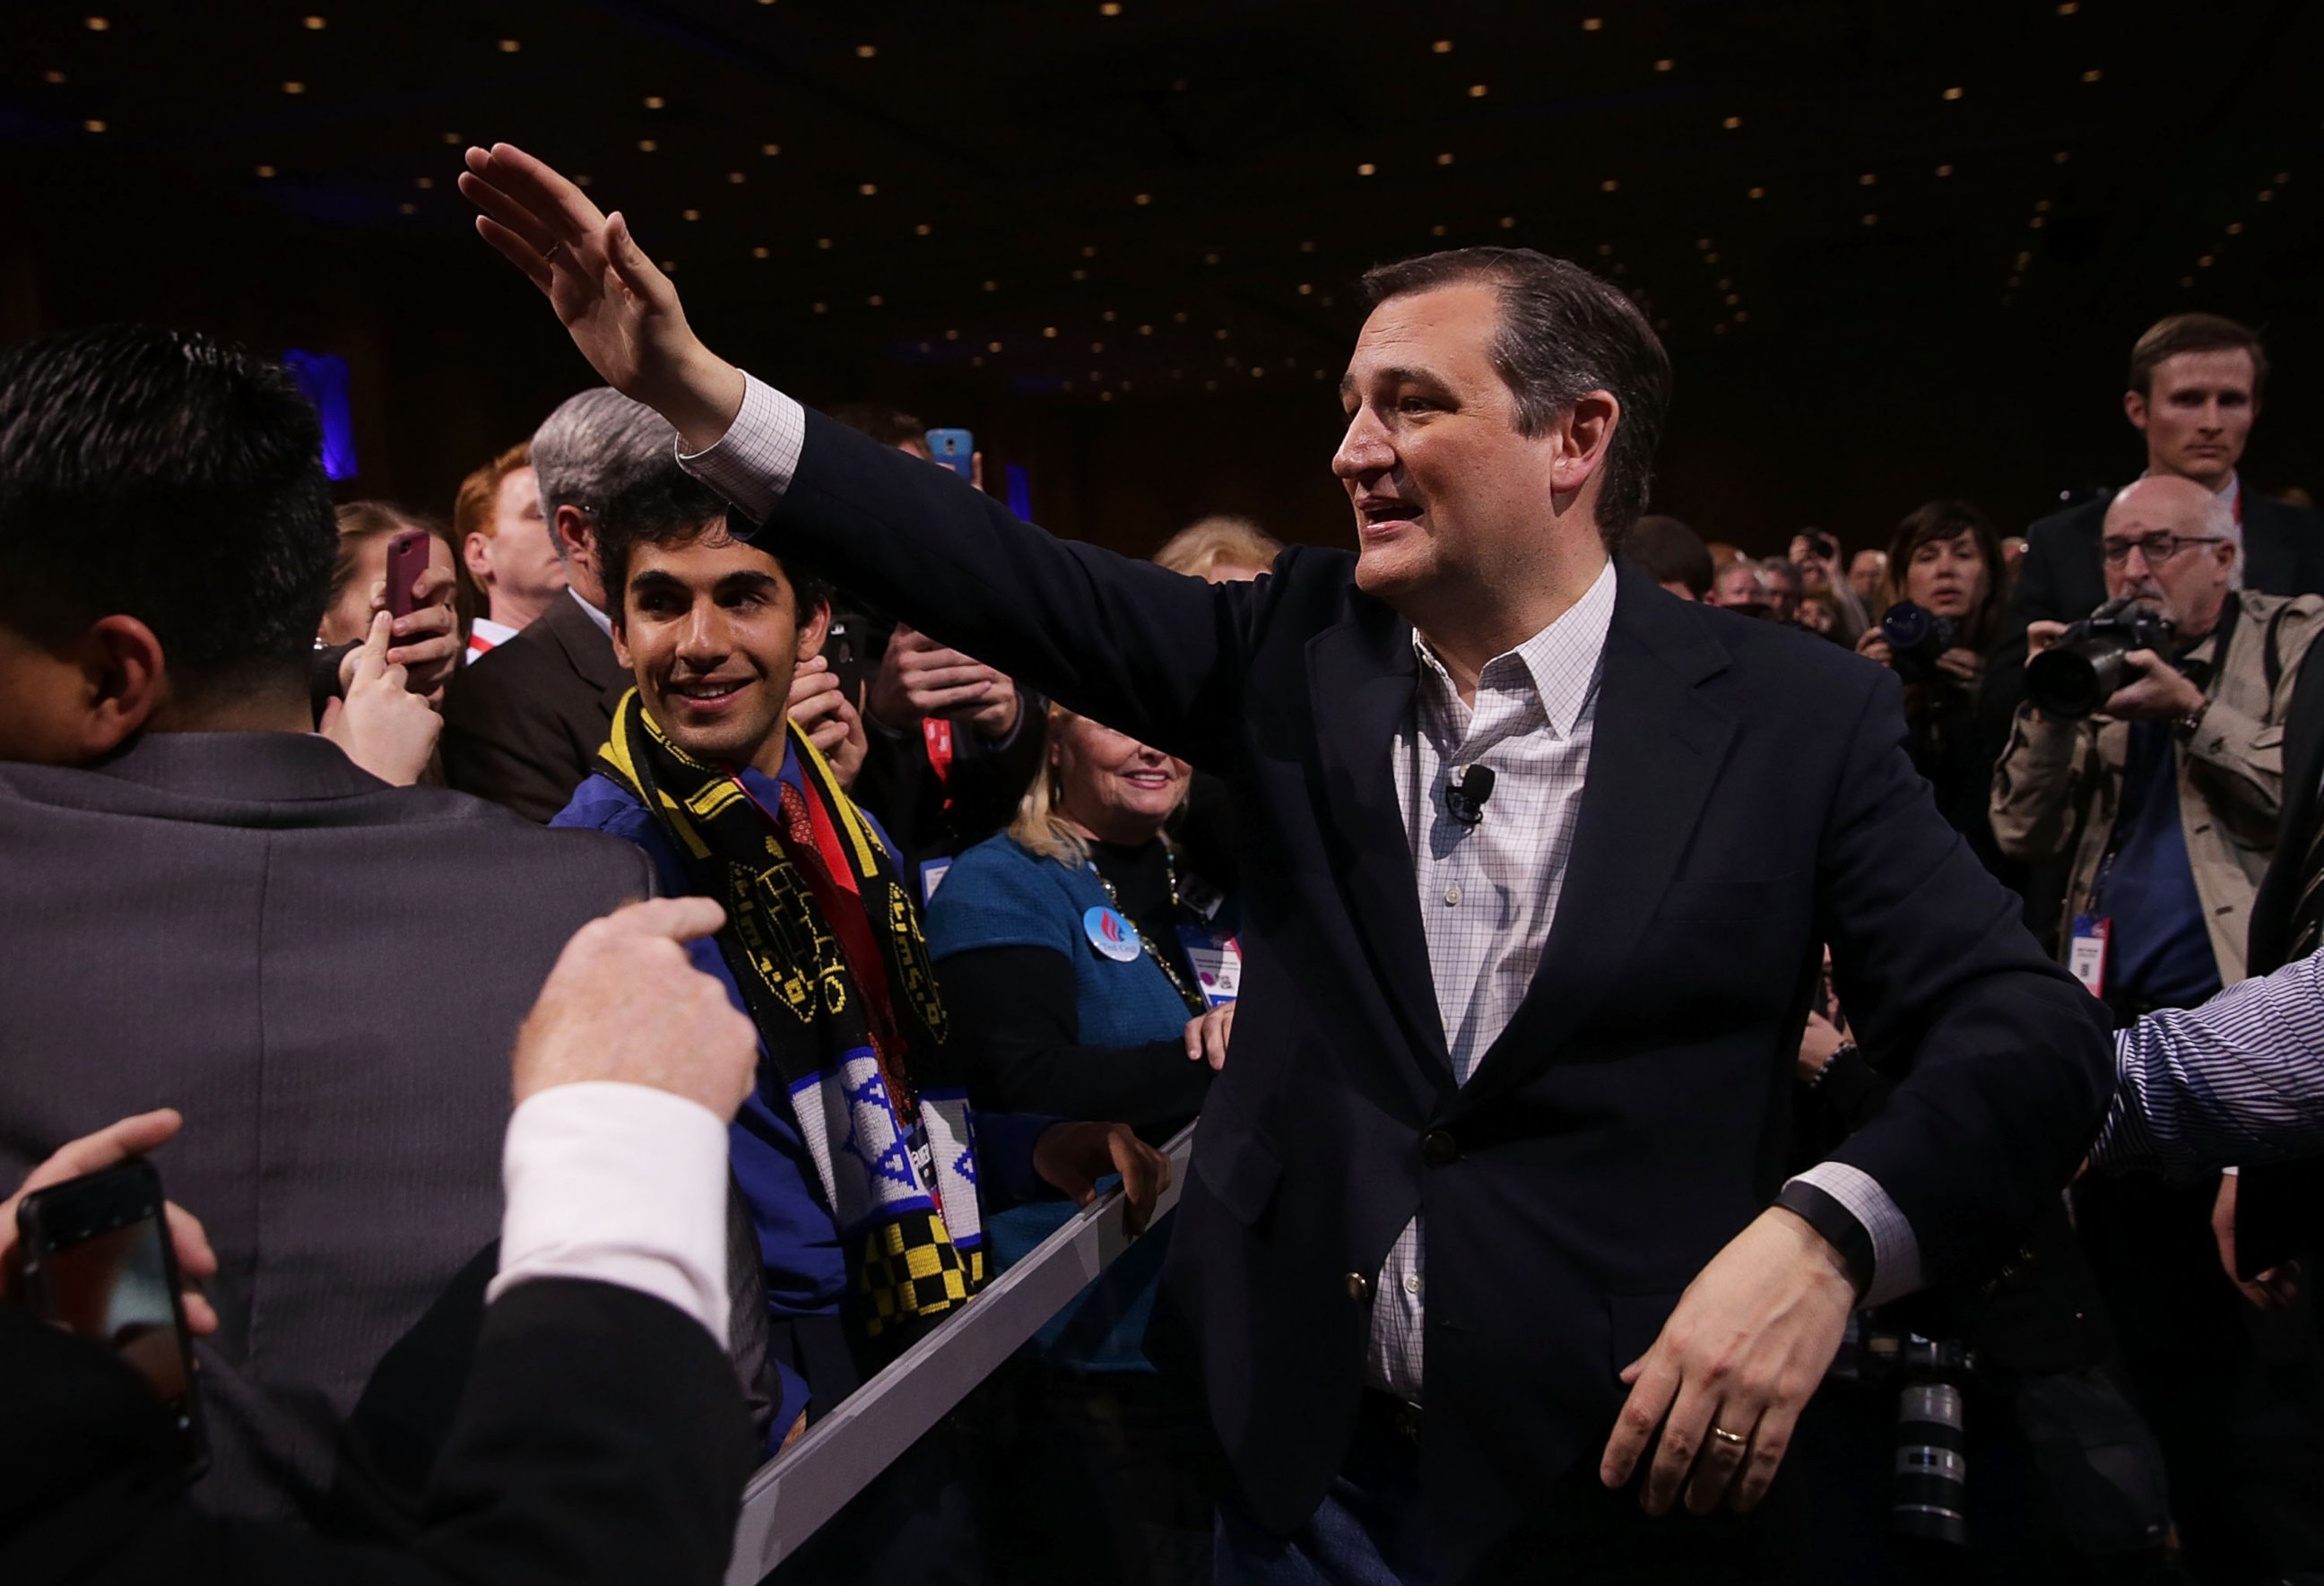 PHOTO:Ted Cruz greets supporters during the Conservative Political Action Conference, March 4, 2016, in National Harbor, Md.  